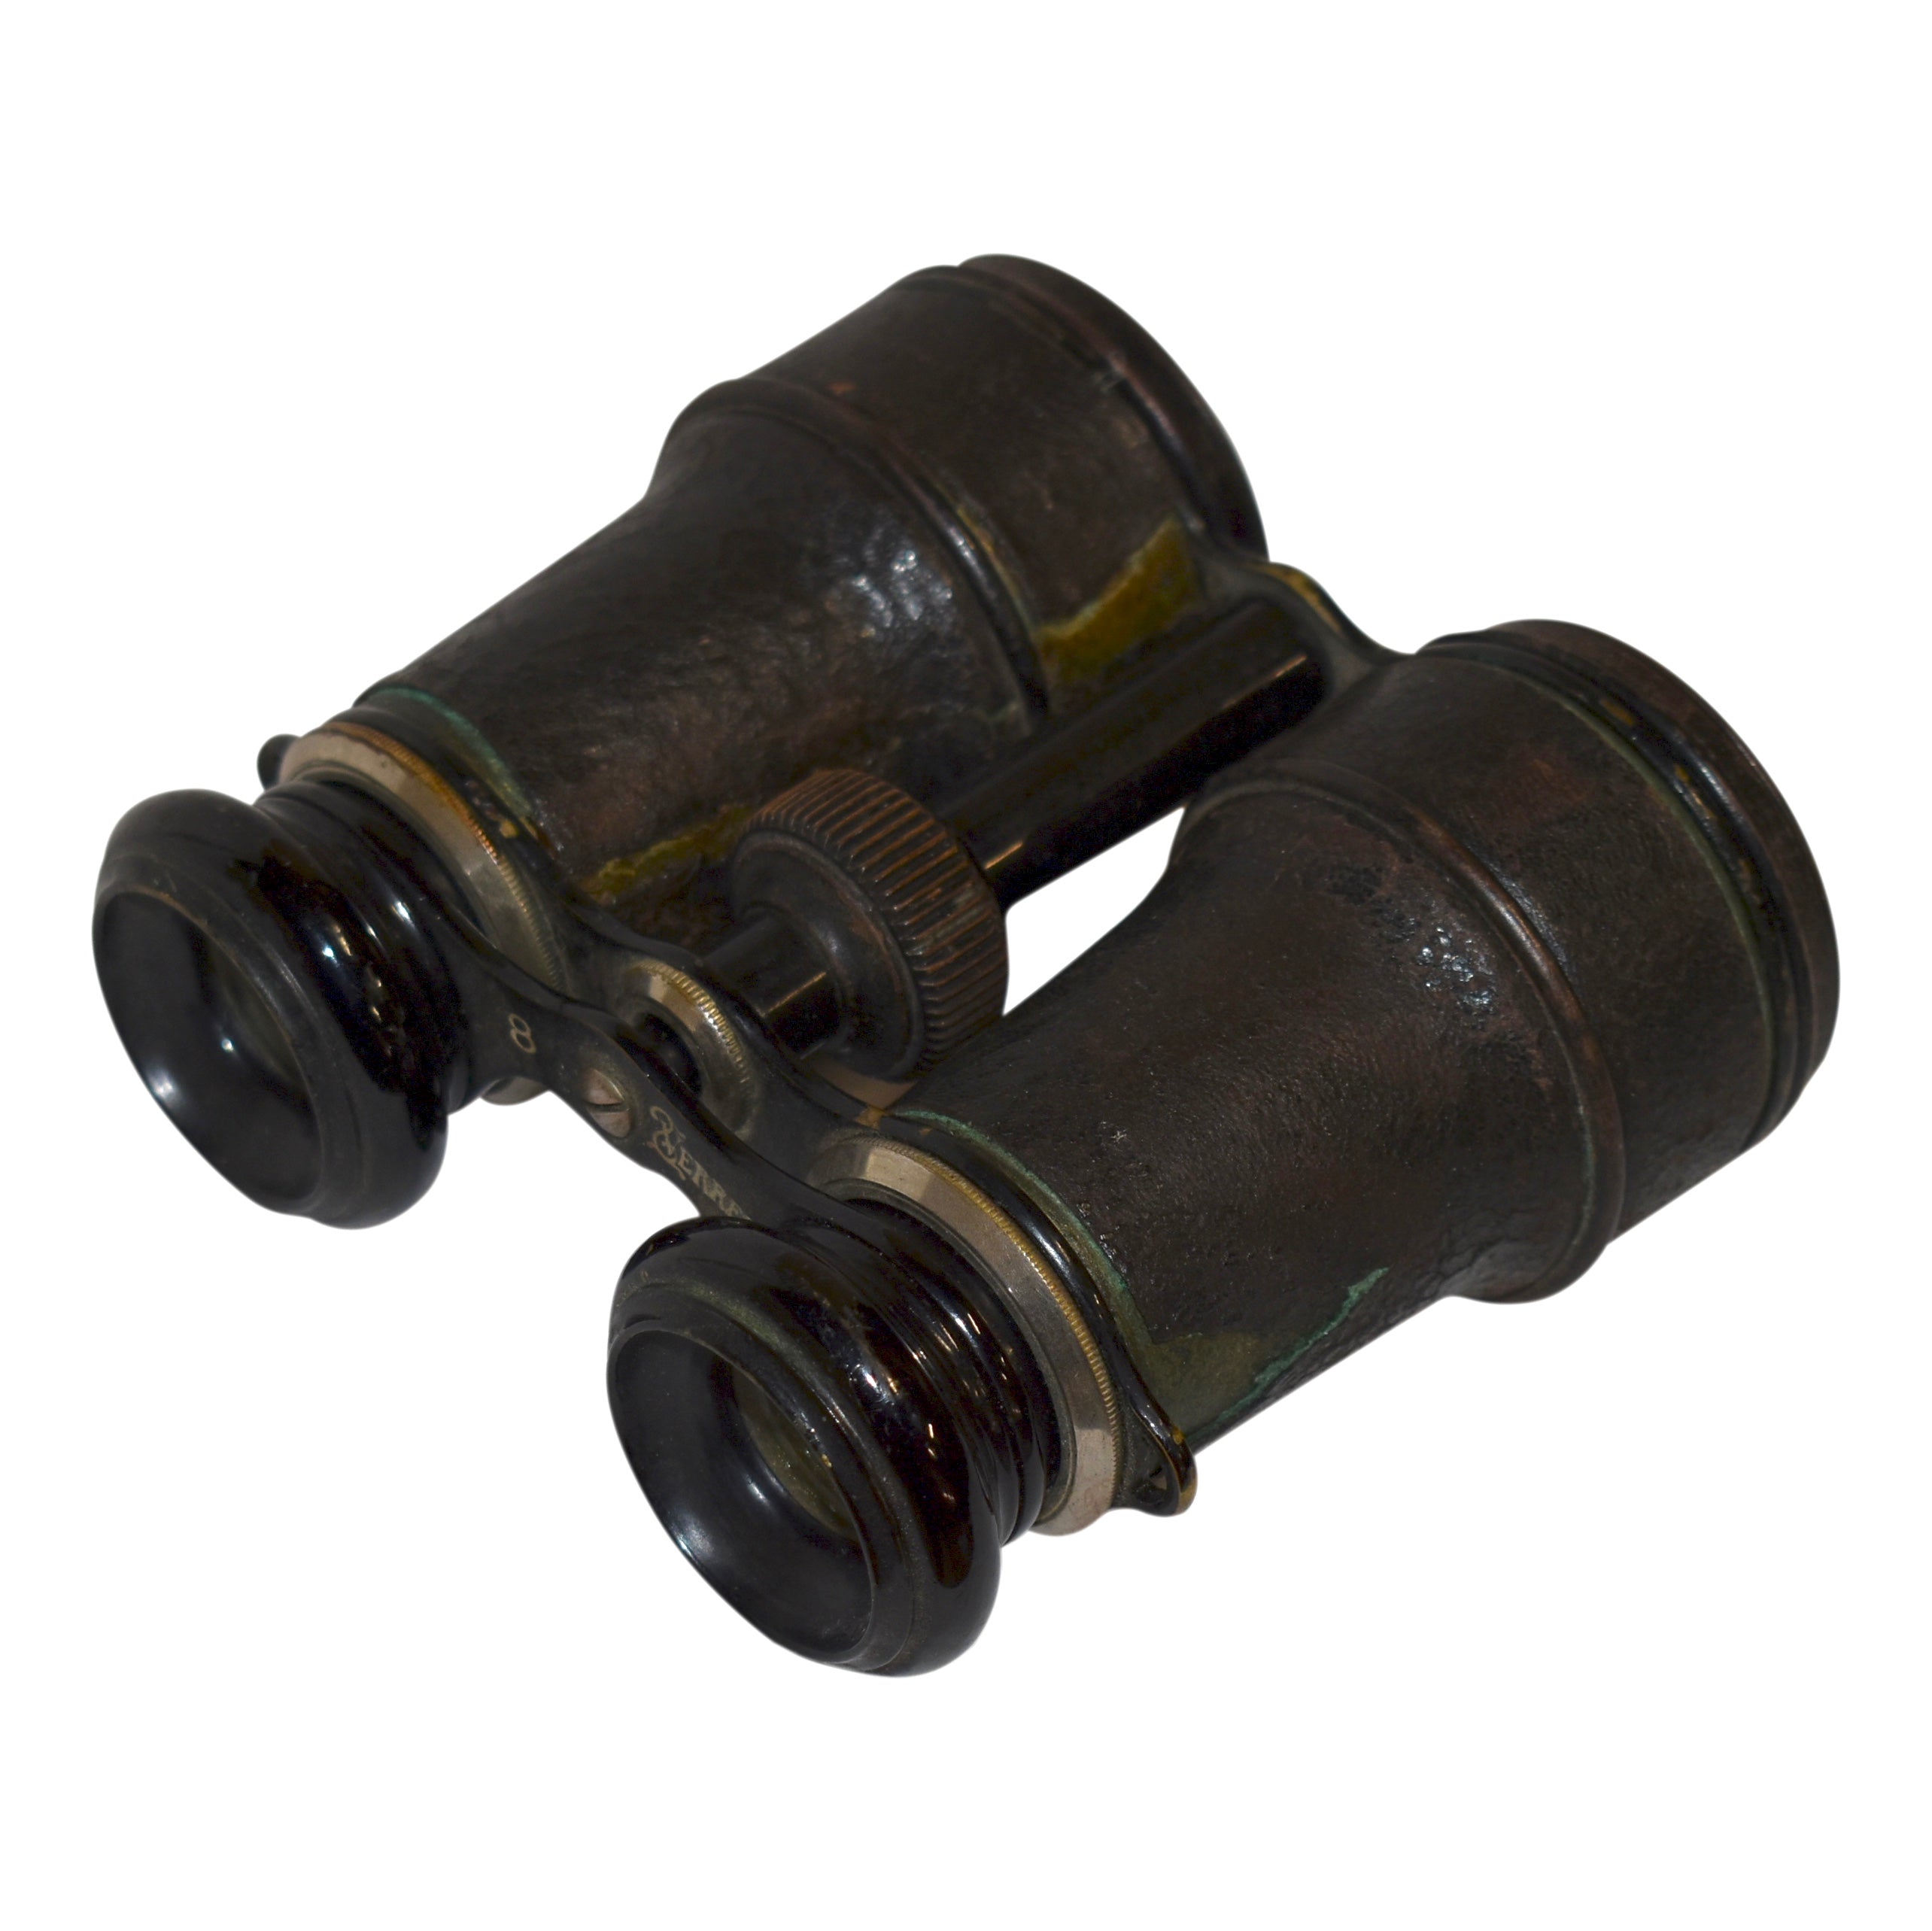 French Binoculars with Compass